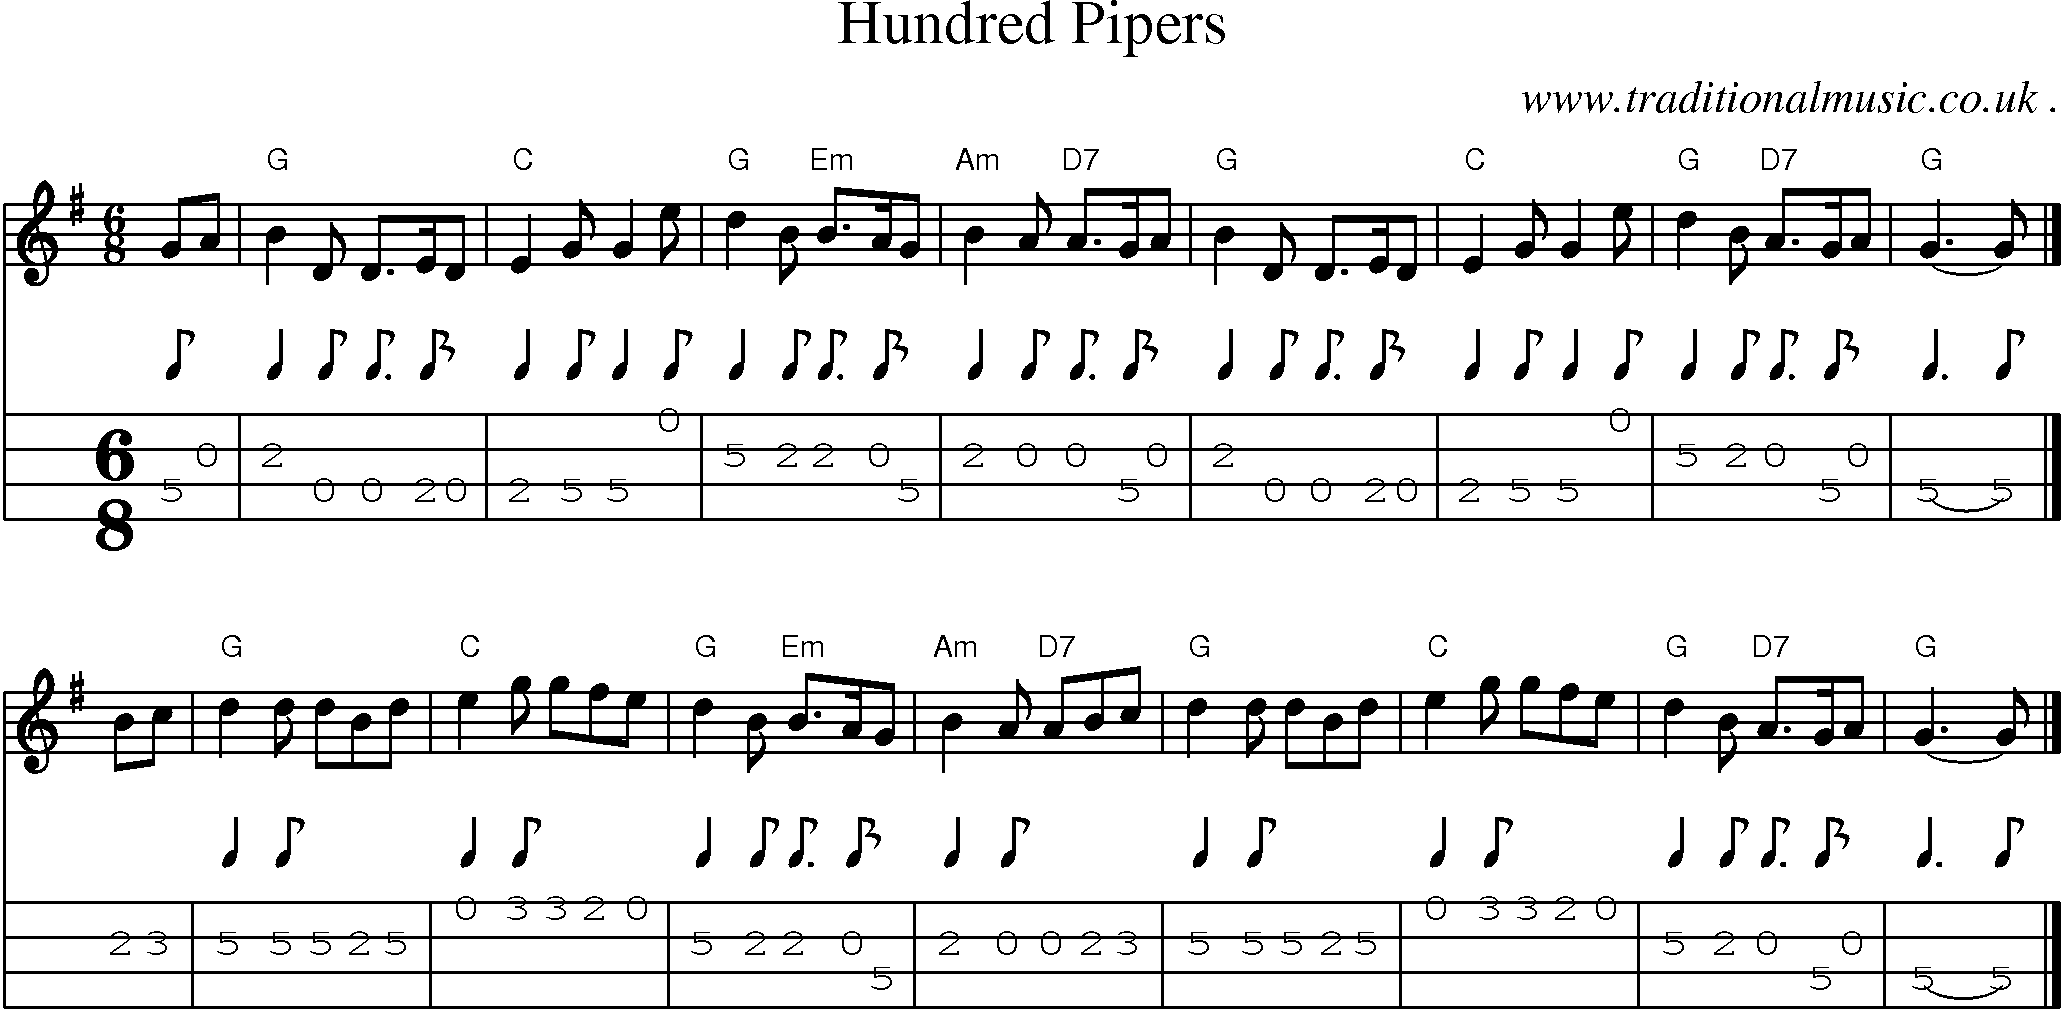 Sheet-music  score, Chords and Mandolin Tabs for Hundred Pipers